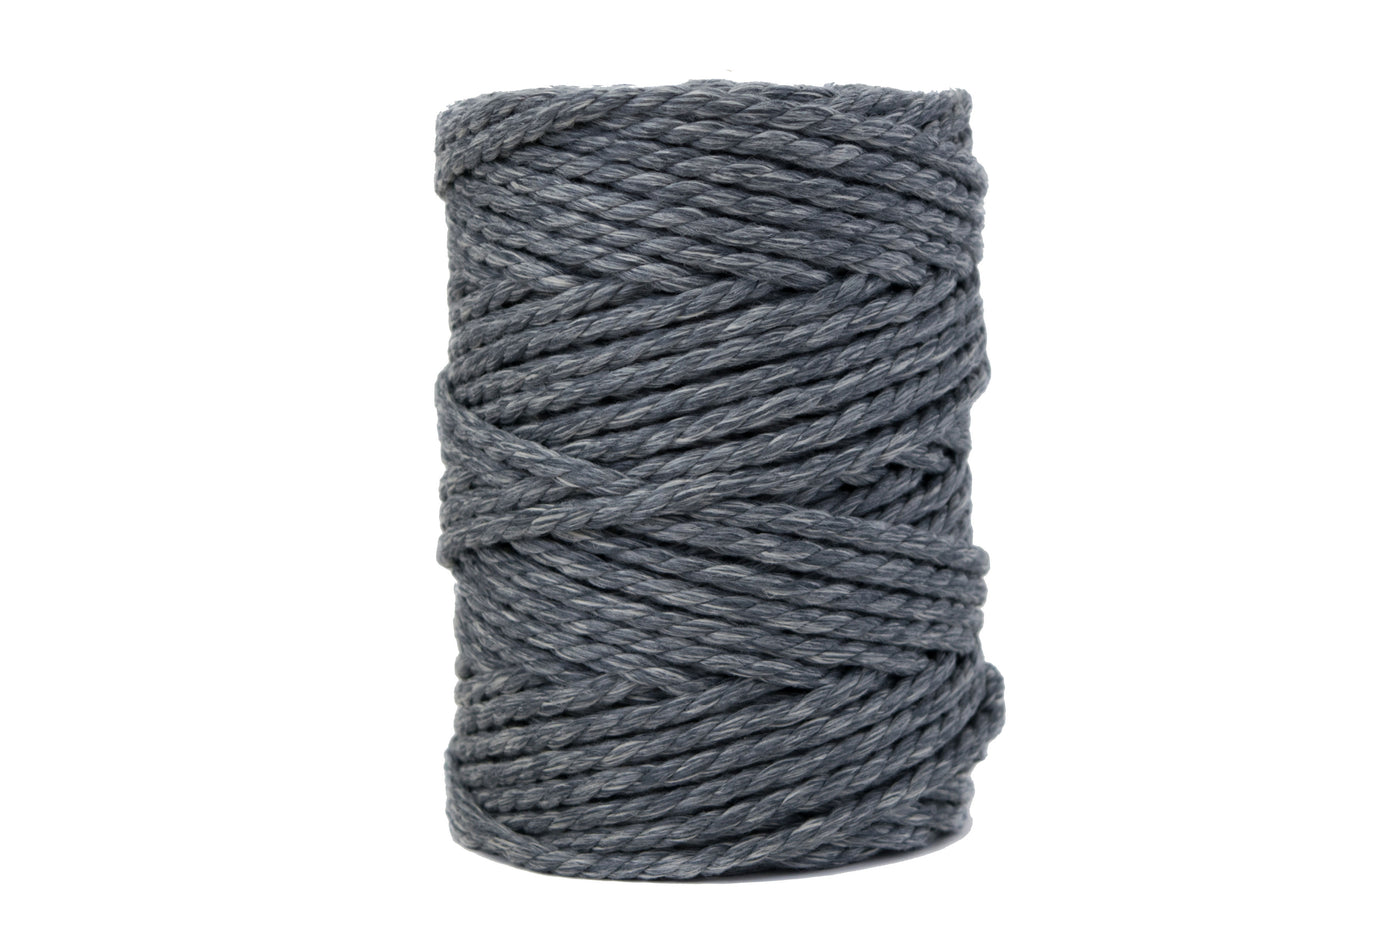 OUTDOORS RECYCLED POLYESTER ROPE 5 MM - 3 PLY - GRAY COLOR